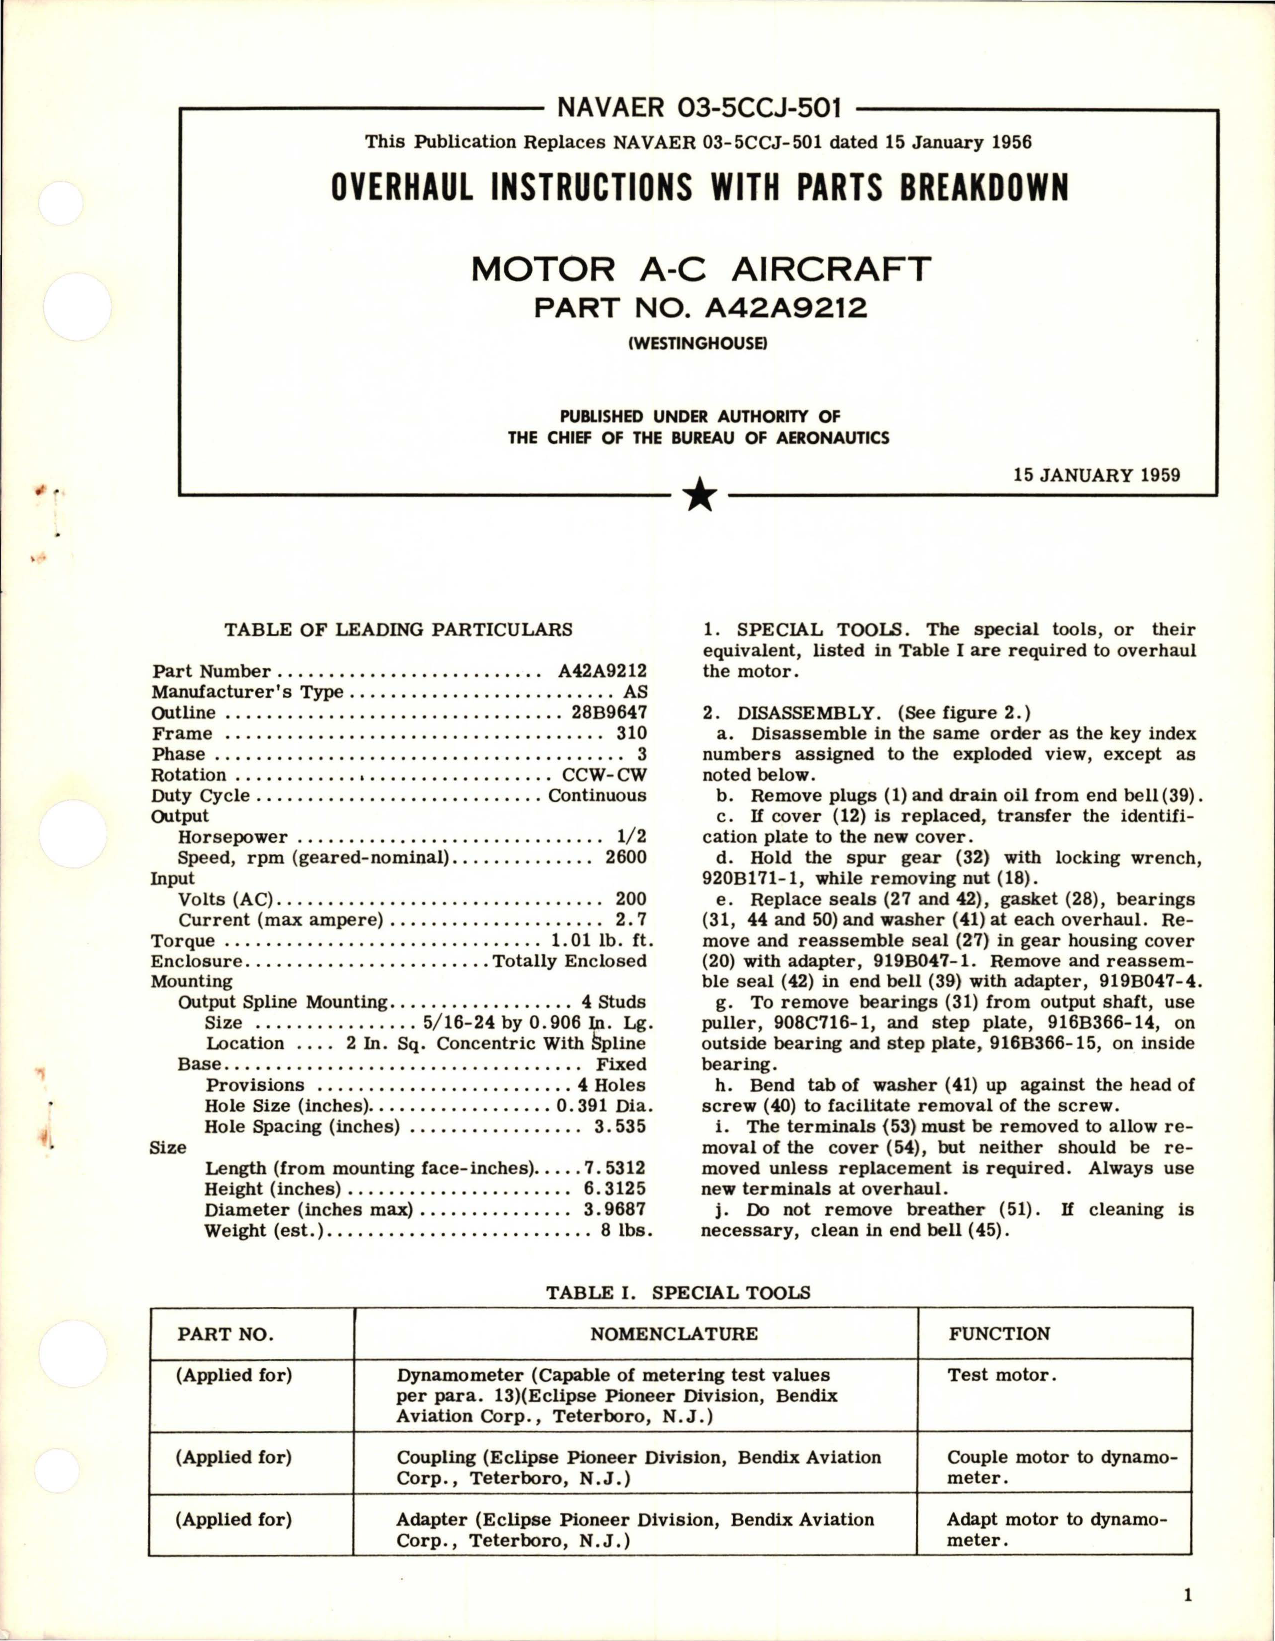 Sample page 1 from AirCorps Library document: Overhaul Instructions with Parts Breakdown for AC Motor - Part A42A9212